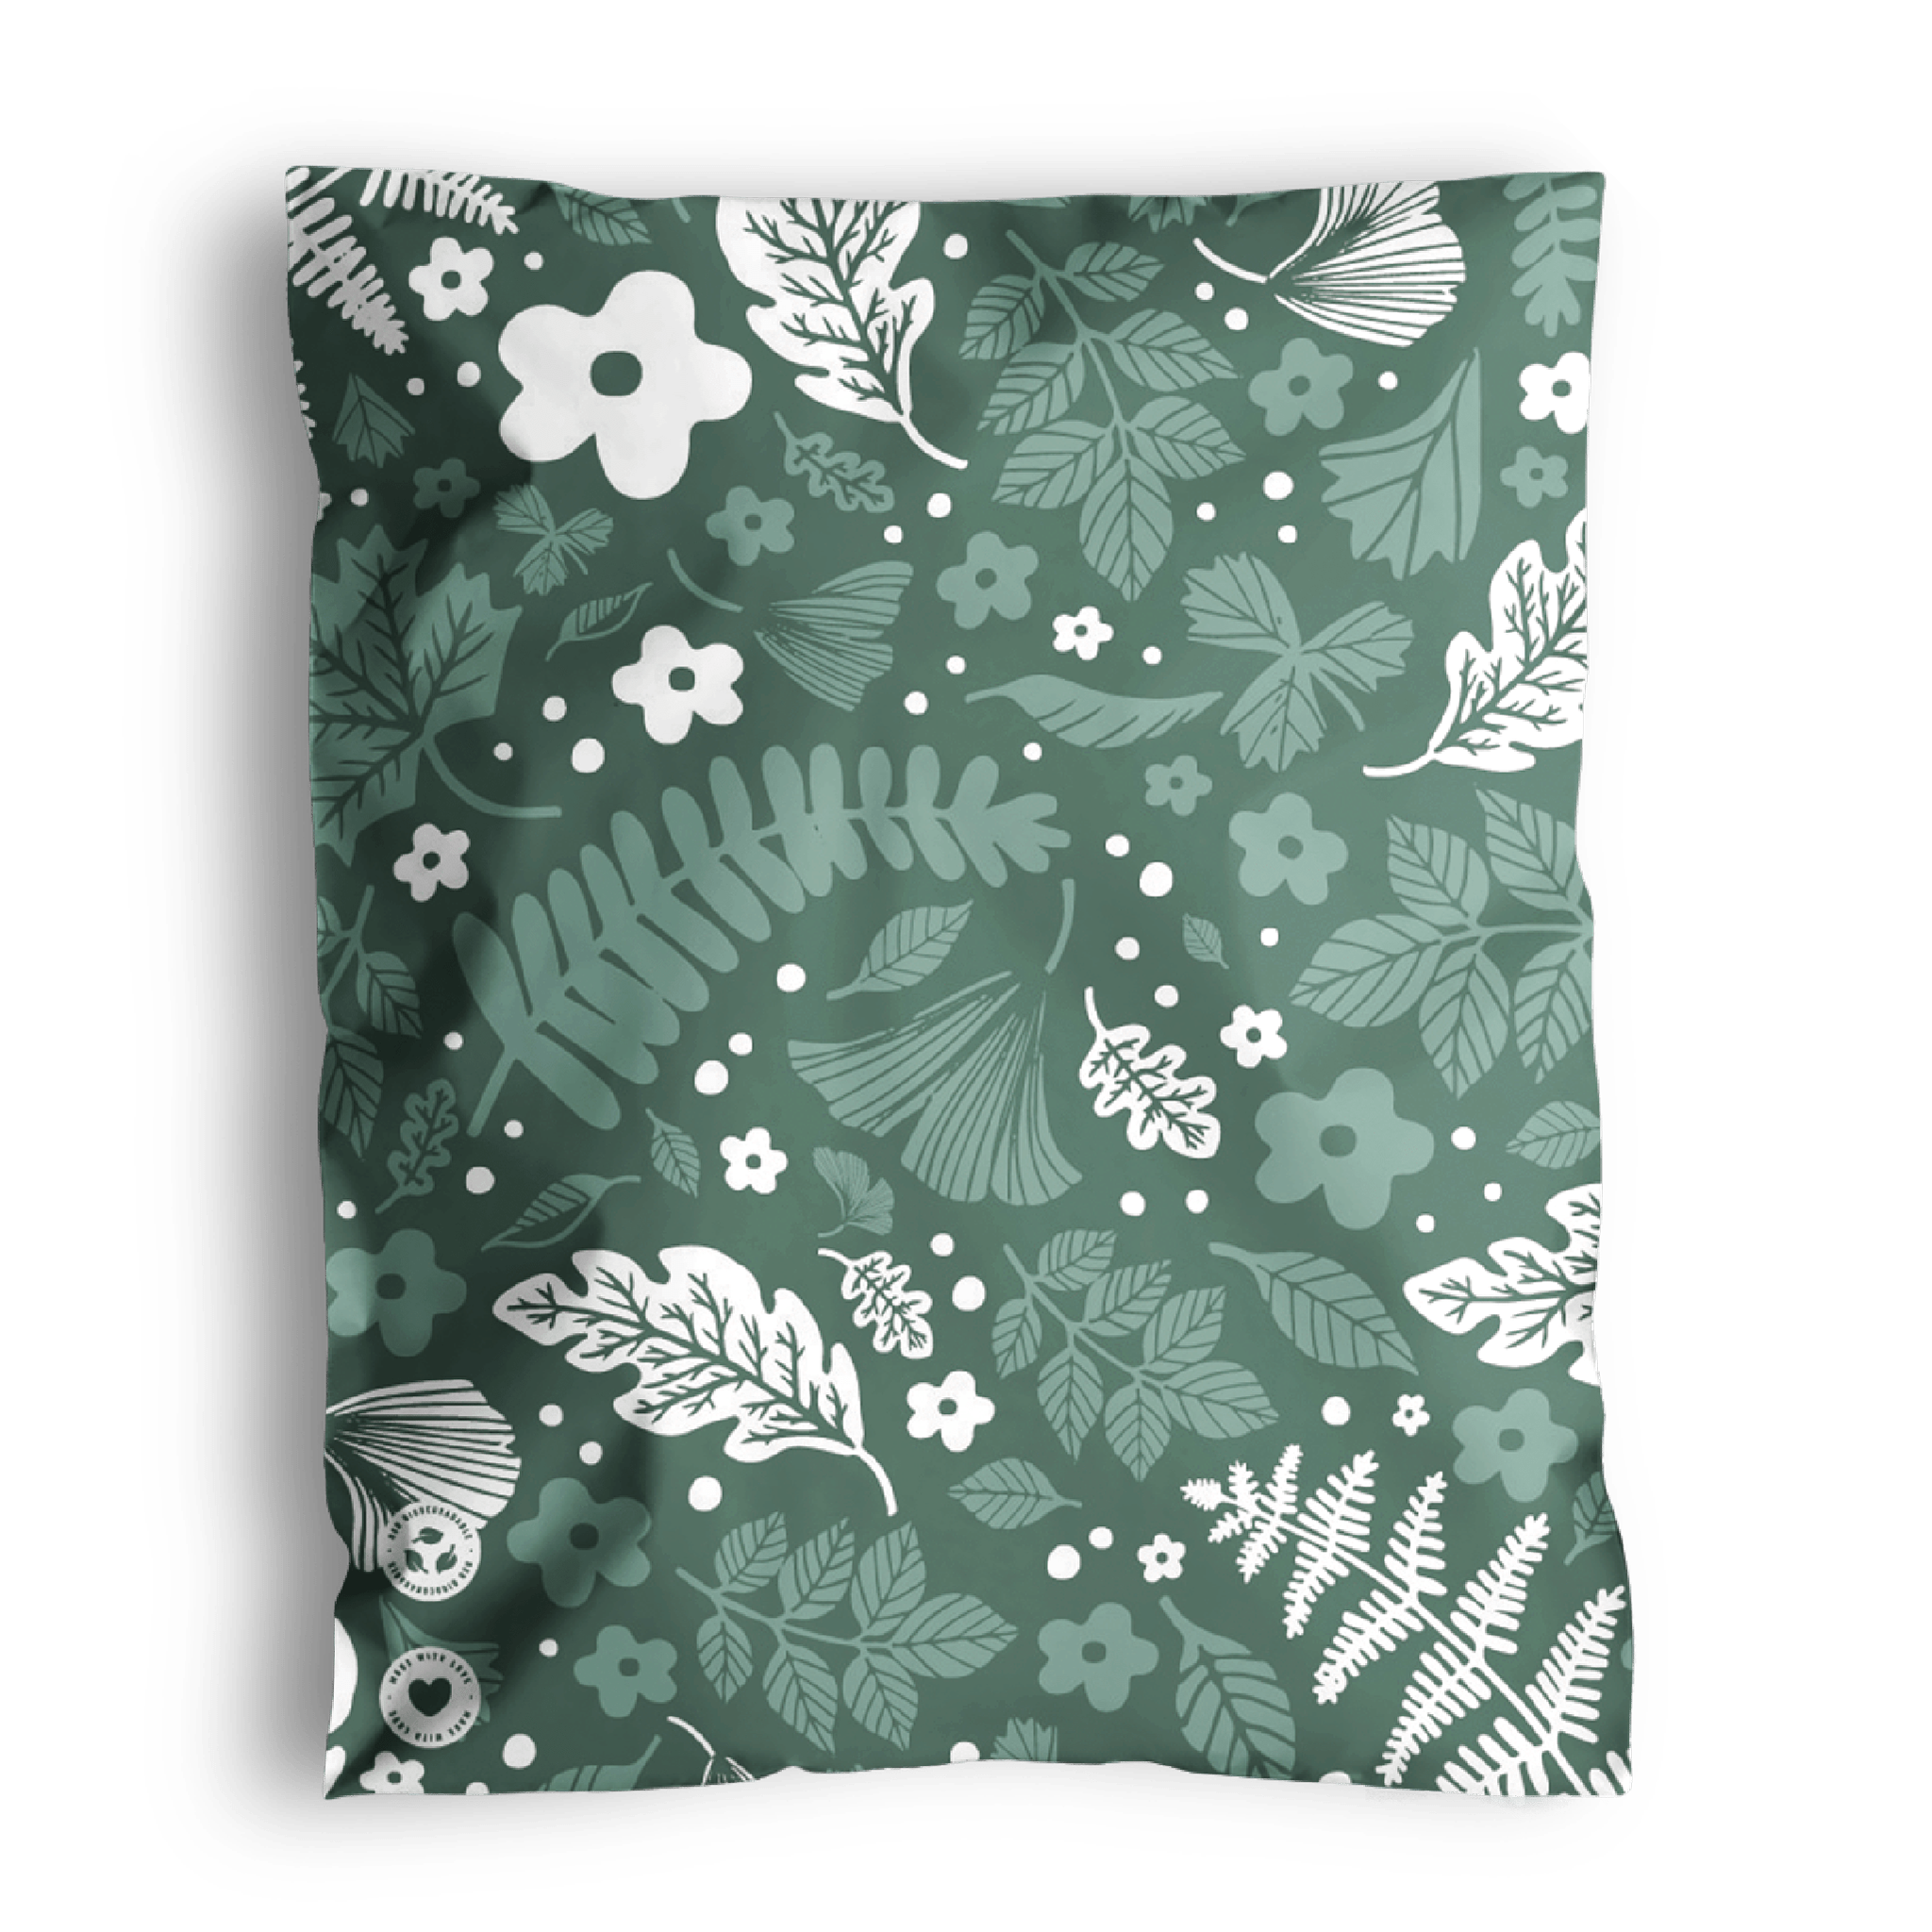 Decorative floral pattern on a fabric with a folded corner, wrapped in impack.co's Emerald Evergreen Biodegradable Mailers 10" x 13".